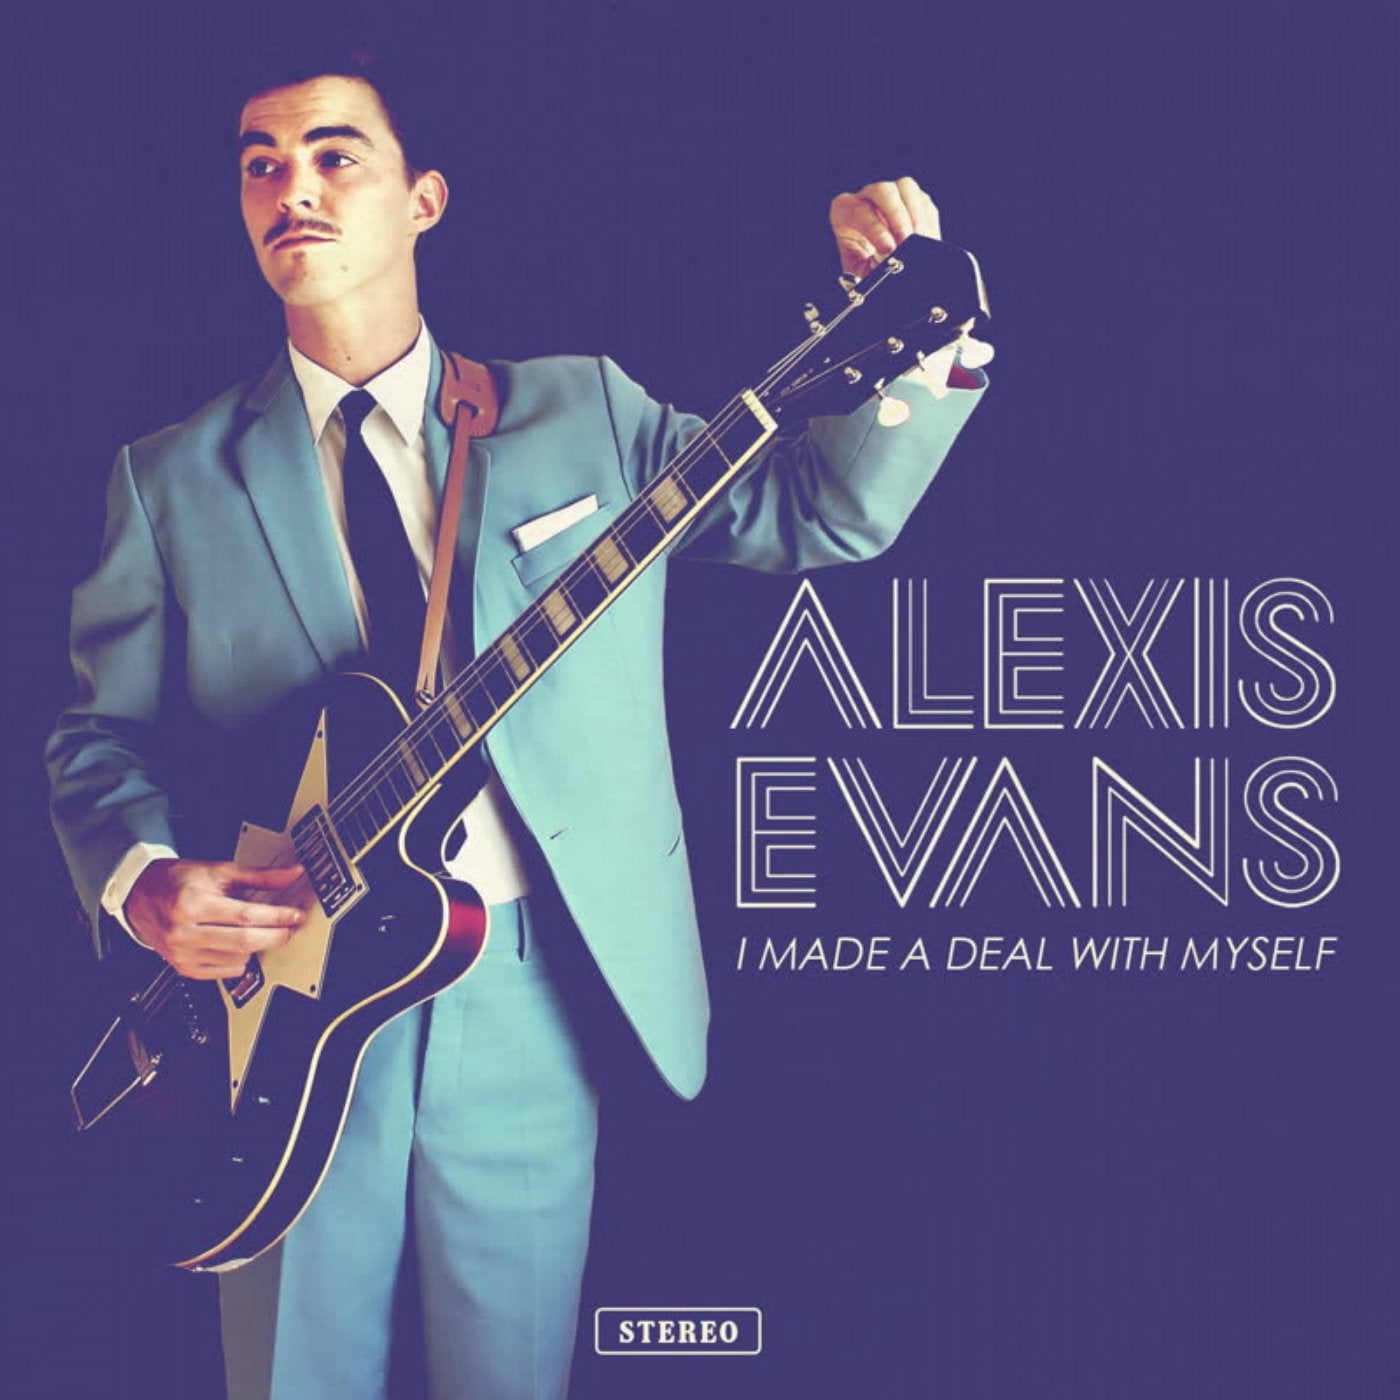 From Bordeaux rolls in Alexis Evans, the next big thing of deep soul scene....